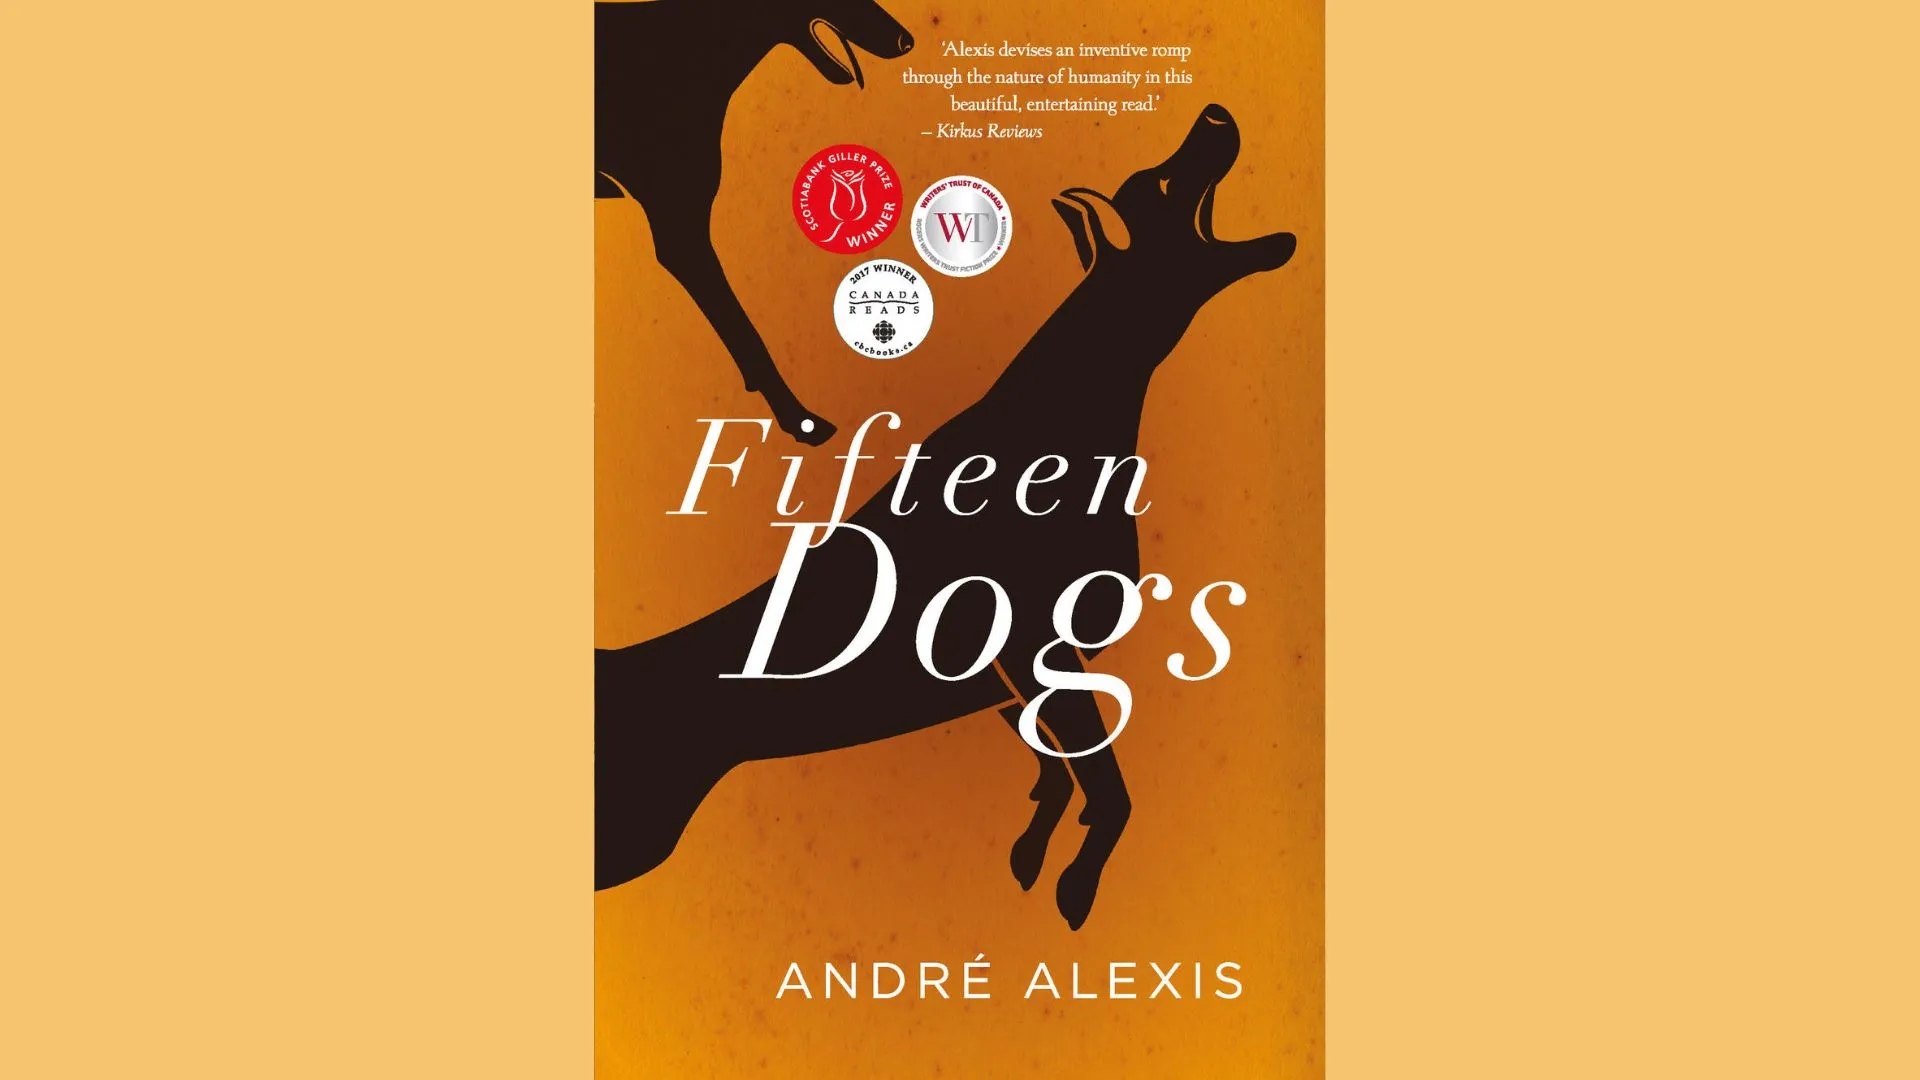 The book cover of Fifteen Dogs by André Alexis